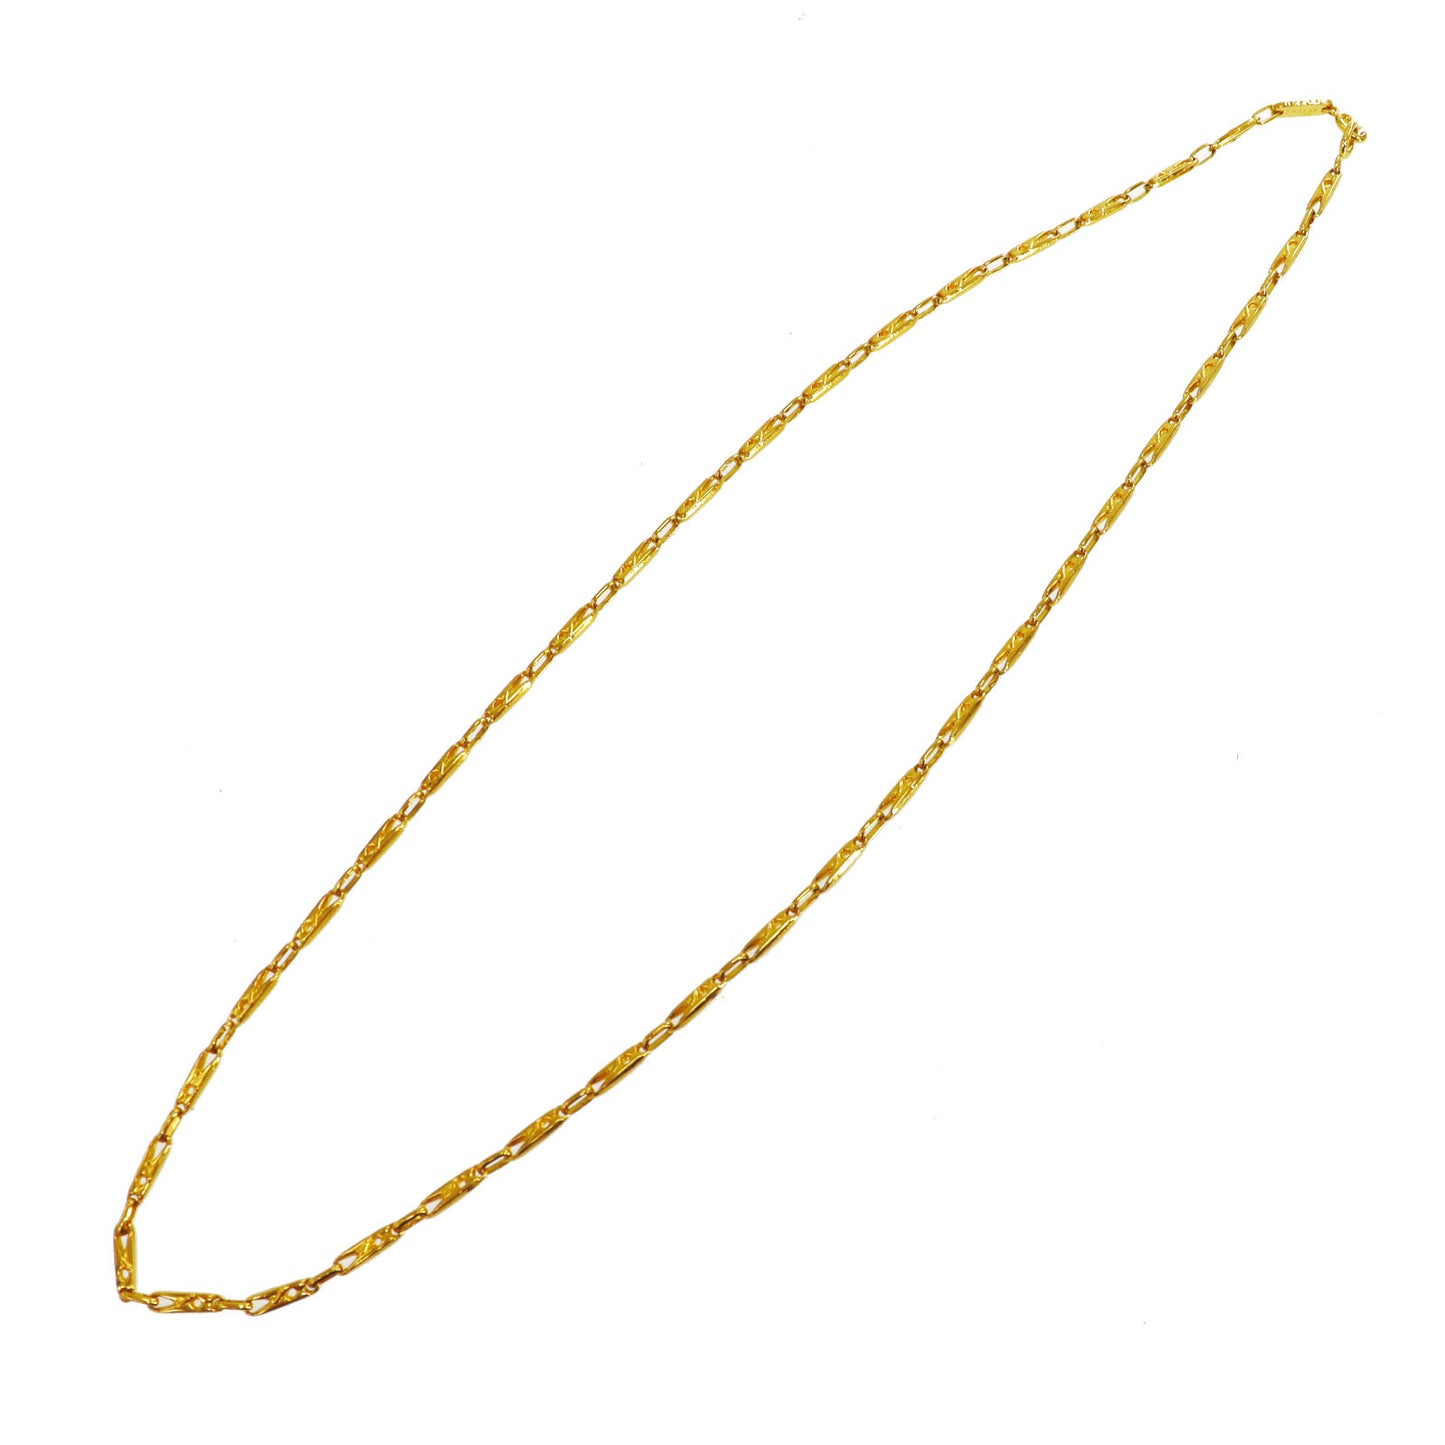 CELINE Logos Clothespins Gold Plated Chain Long Necklace #CE505